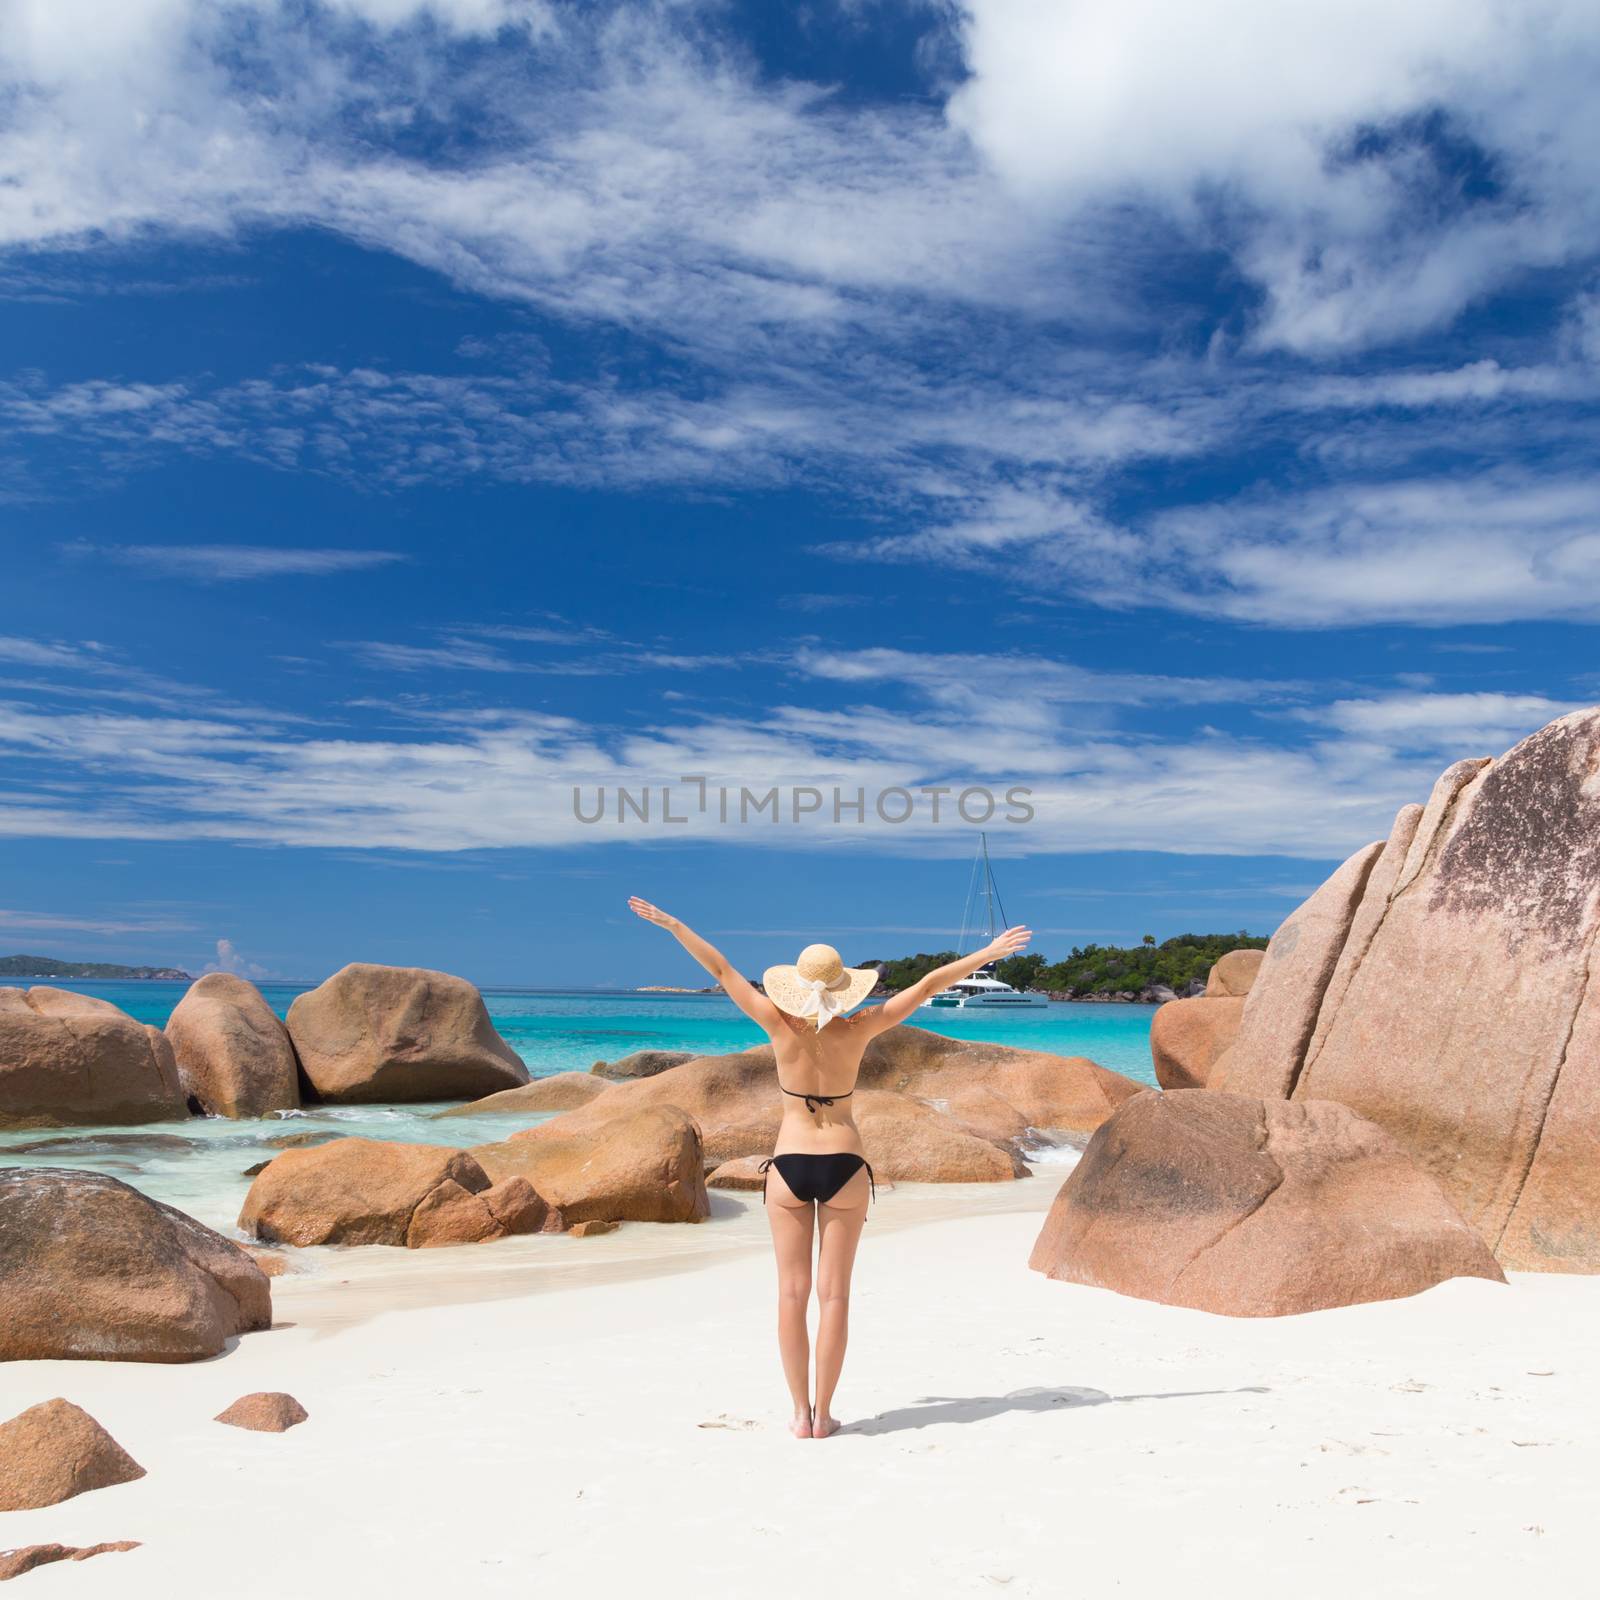 Woman arms rised, wearing black bikini and beach hat, enjoying amazing view on Anse Lazio beach on Praslin Island, Seychelles. Summer vacations on picture perfect tropical beach concept.